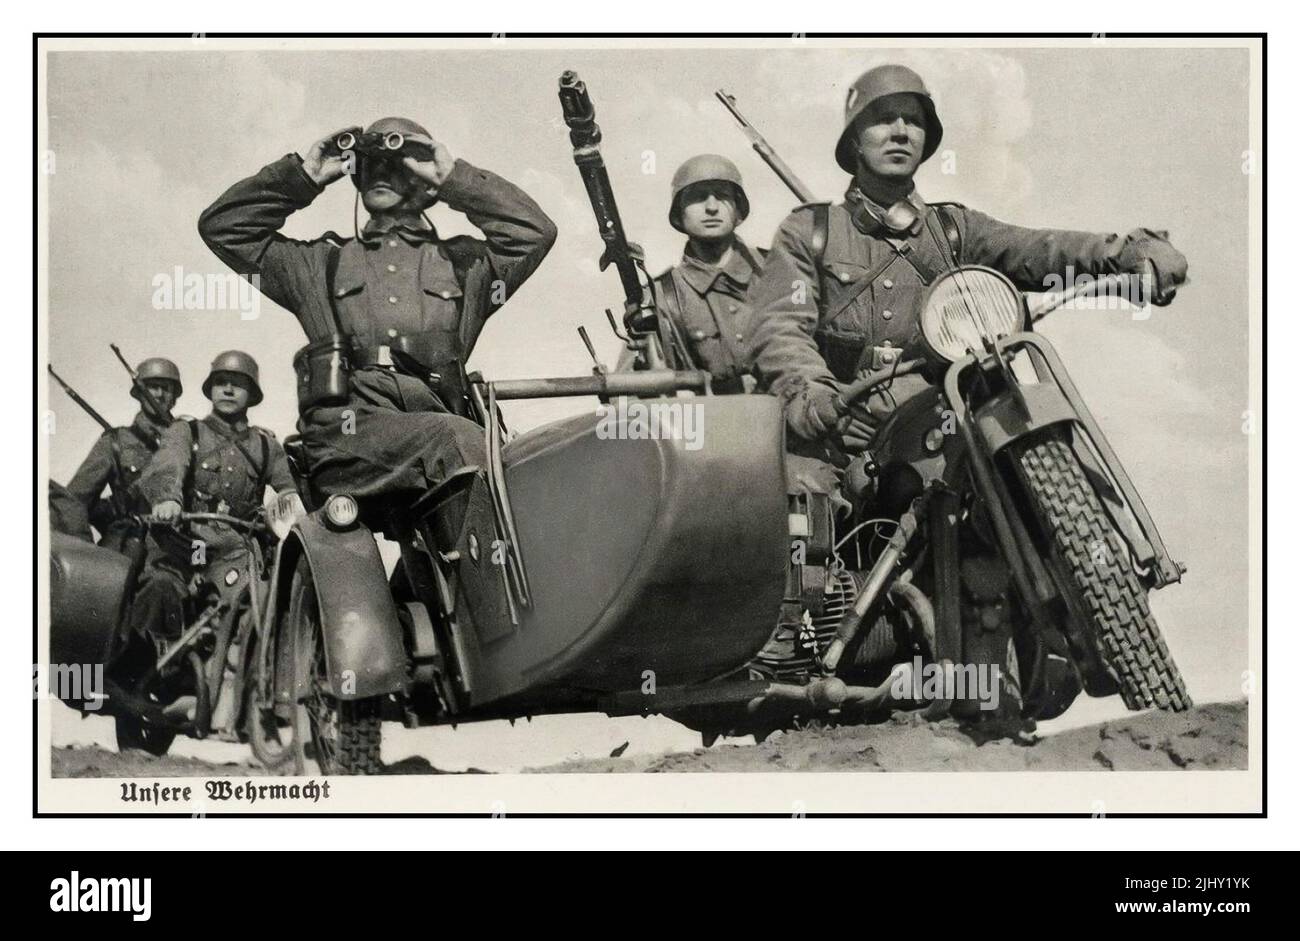 WW2 Nazi Germany Propaganda Postcard of Wehrmacht troops on BMW motorbikes on the battlefield, at the ready. Titled 'OUR WEHRMACHT' 1940s Nazi Gemany Stock Photo